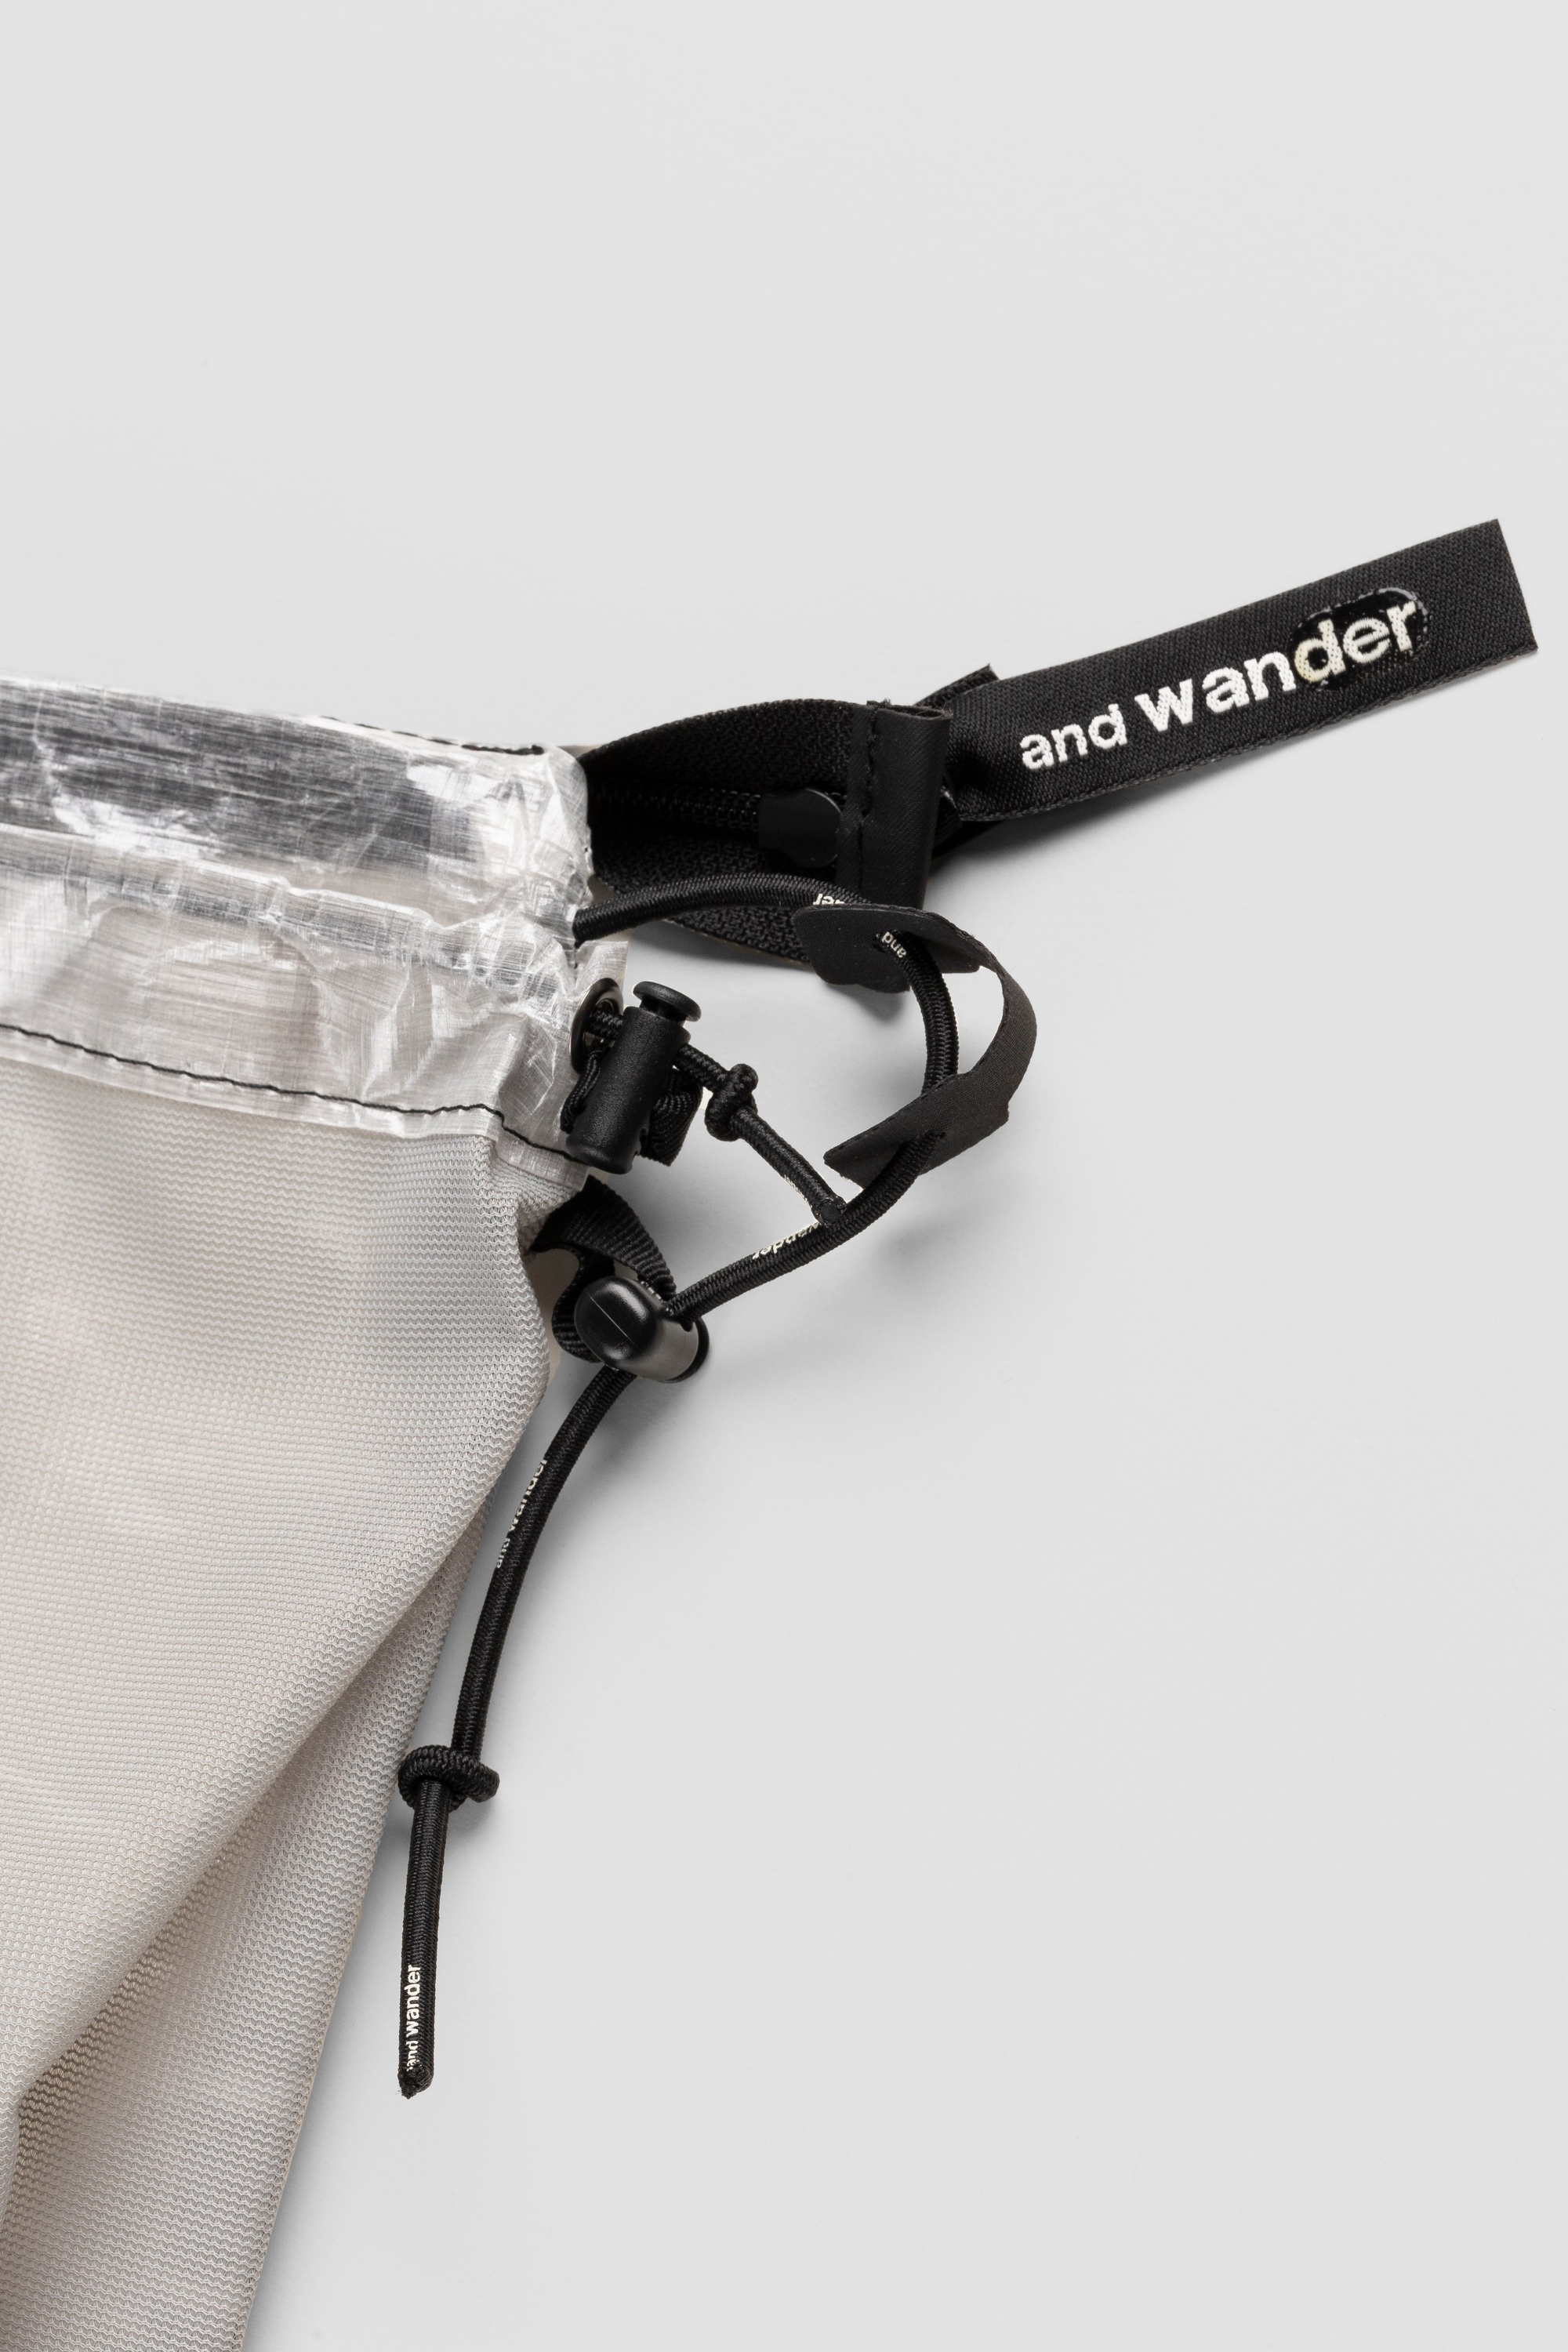 And Wander – Dyneema Satchel White - Pouches - White - Image 5